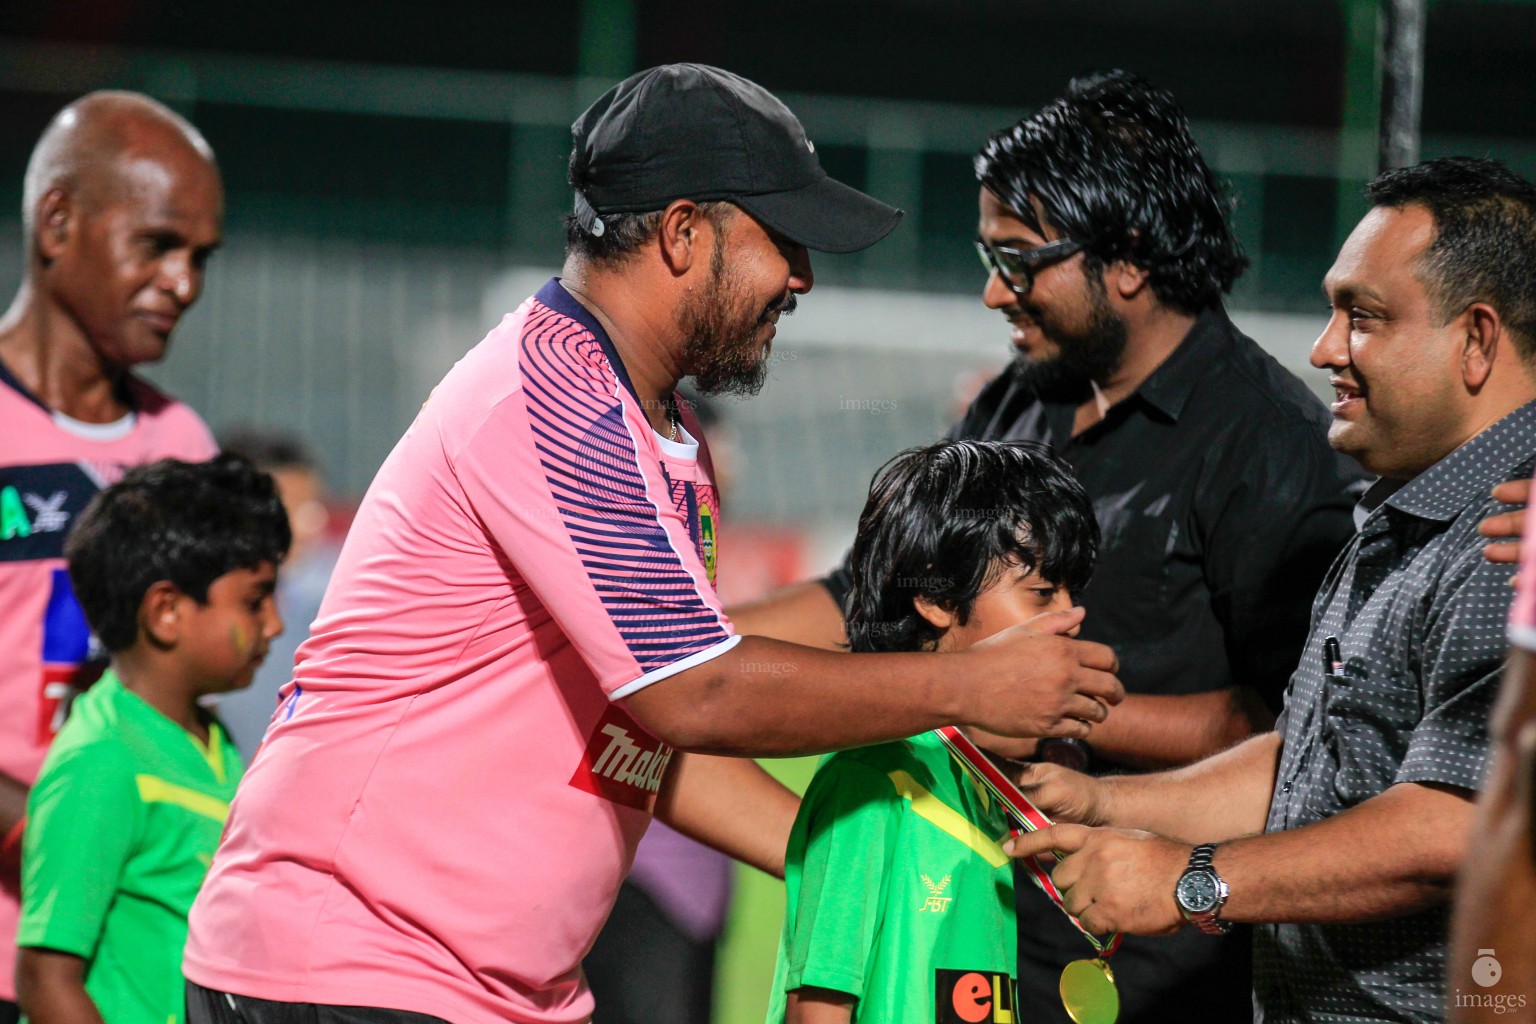 Football Association of Maldives Charity Shield match between New Radiant Sports Club and Maziya Sports and Recreation Cub in Male', Maldives, Tuesday, April. 05, 2016.(Images.mv Photo/ Hussain Sinan).